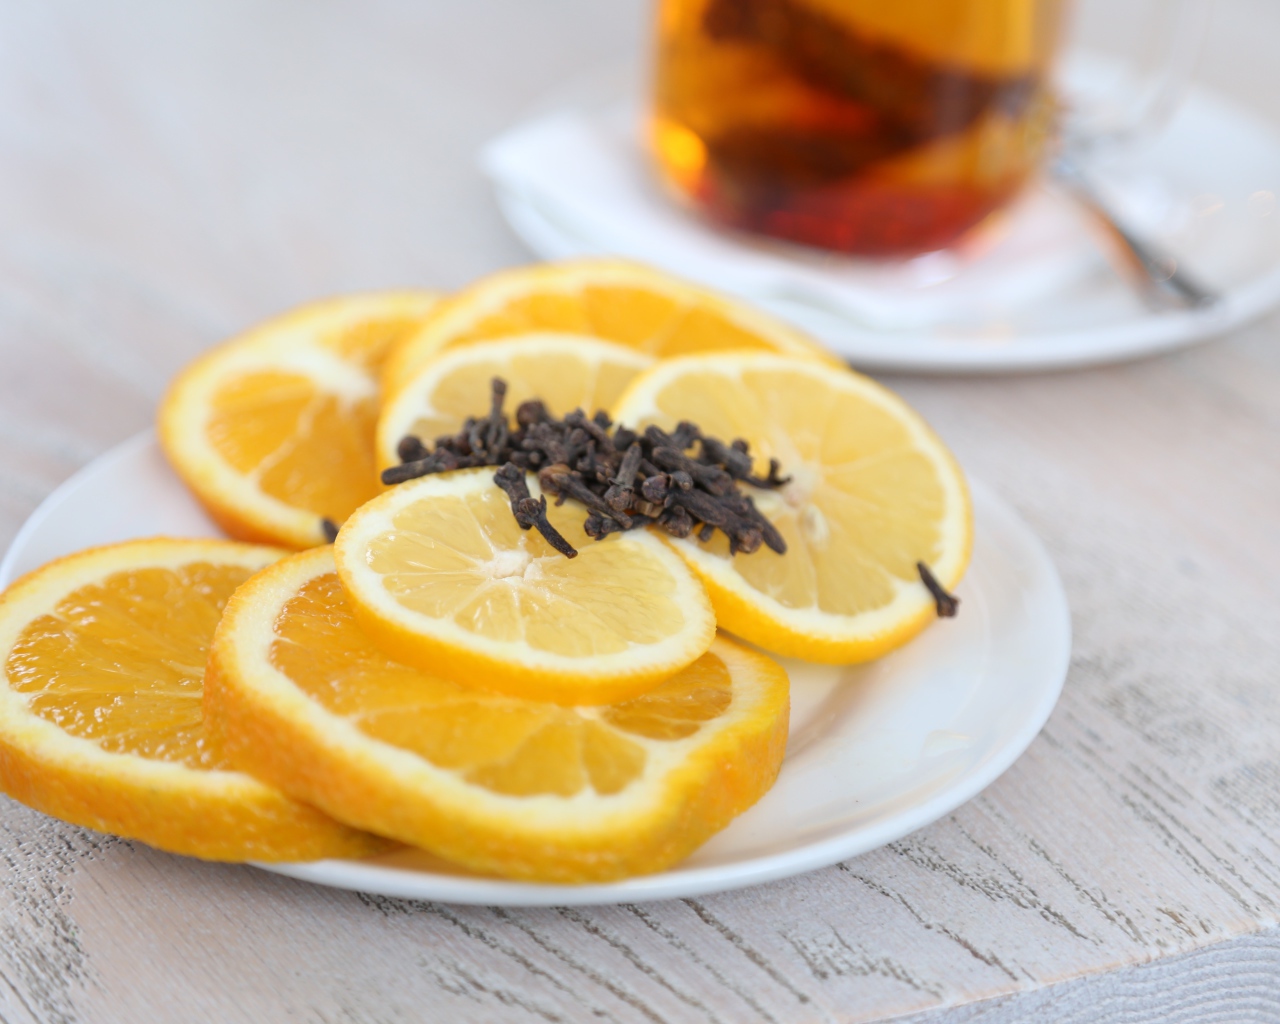 Sliced orange and lemon on a plate with cloves